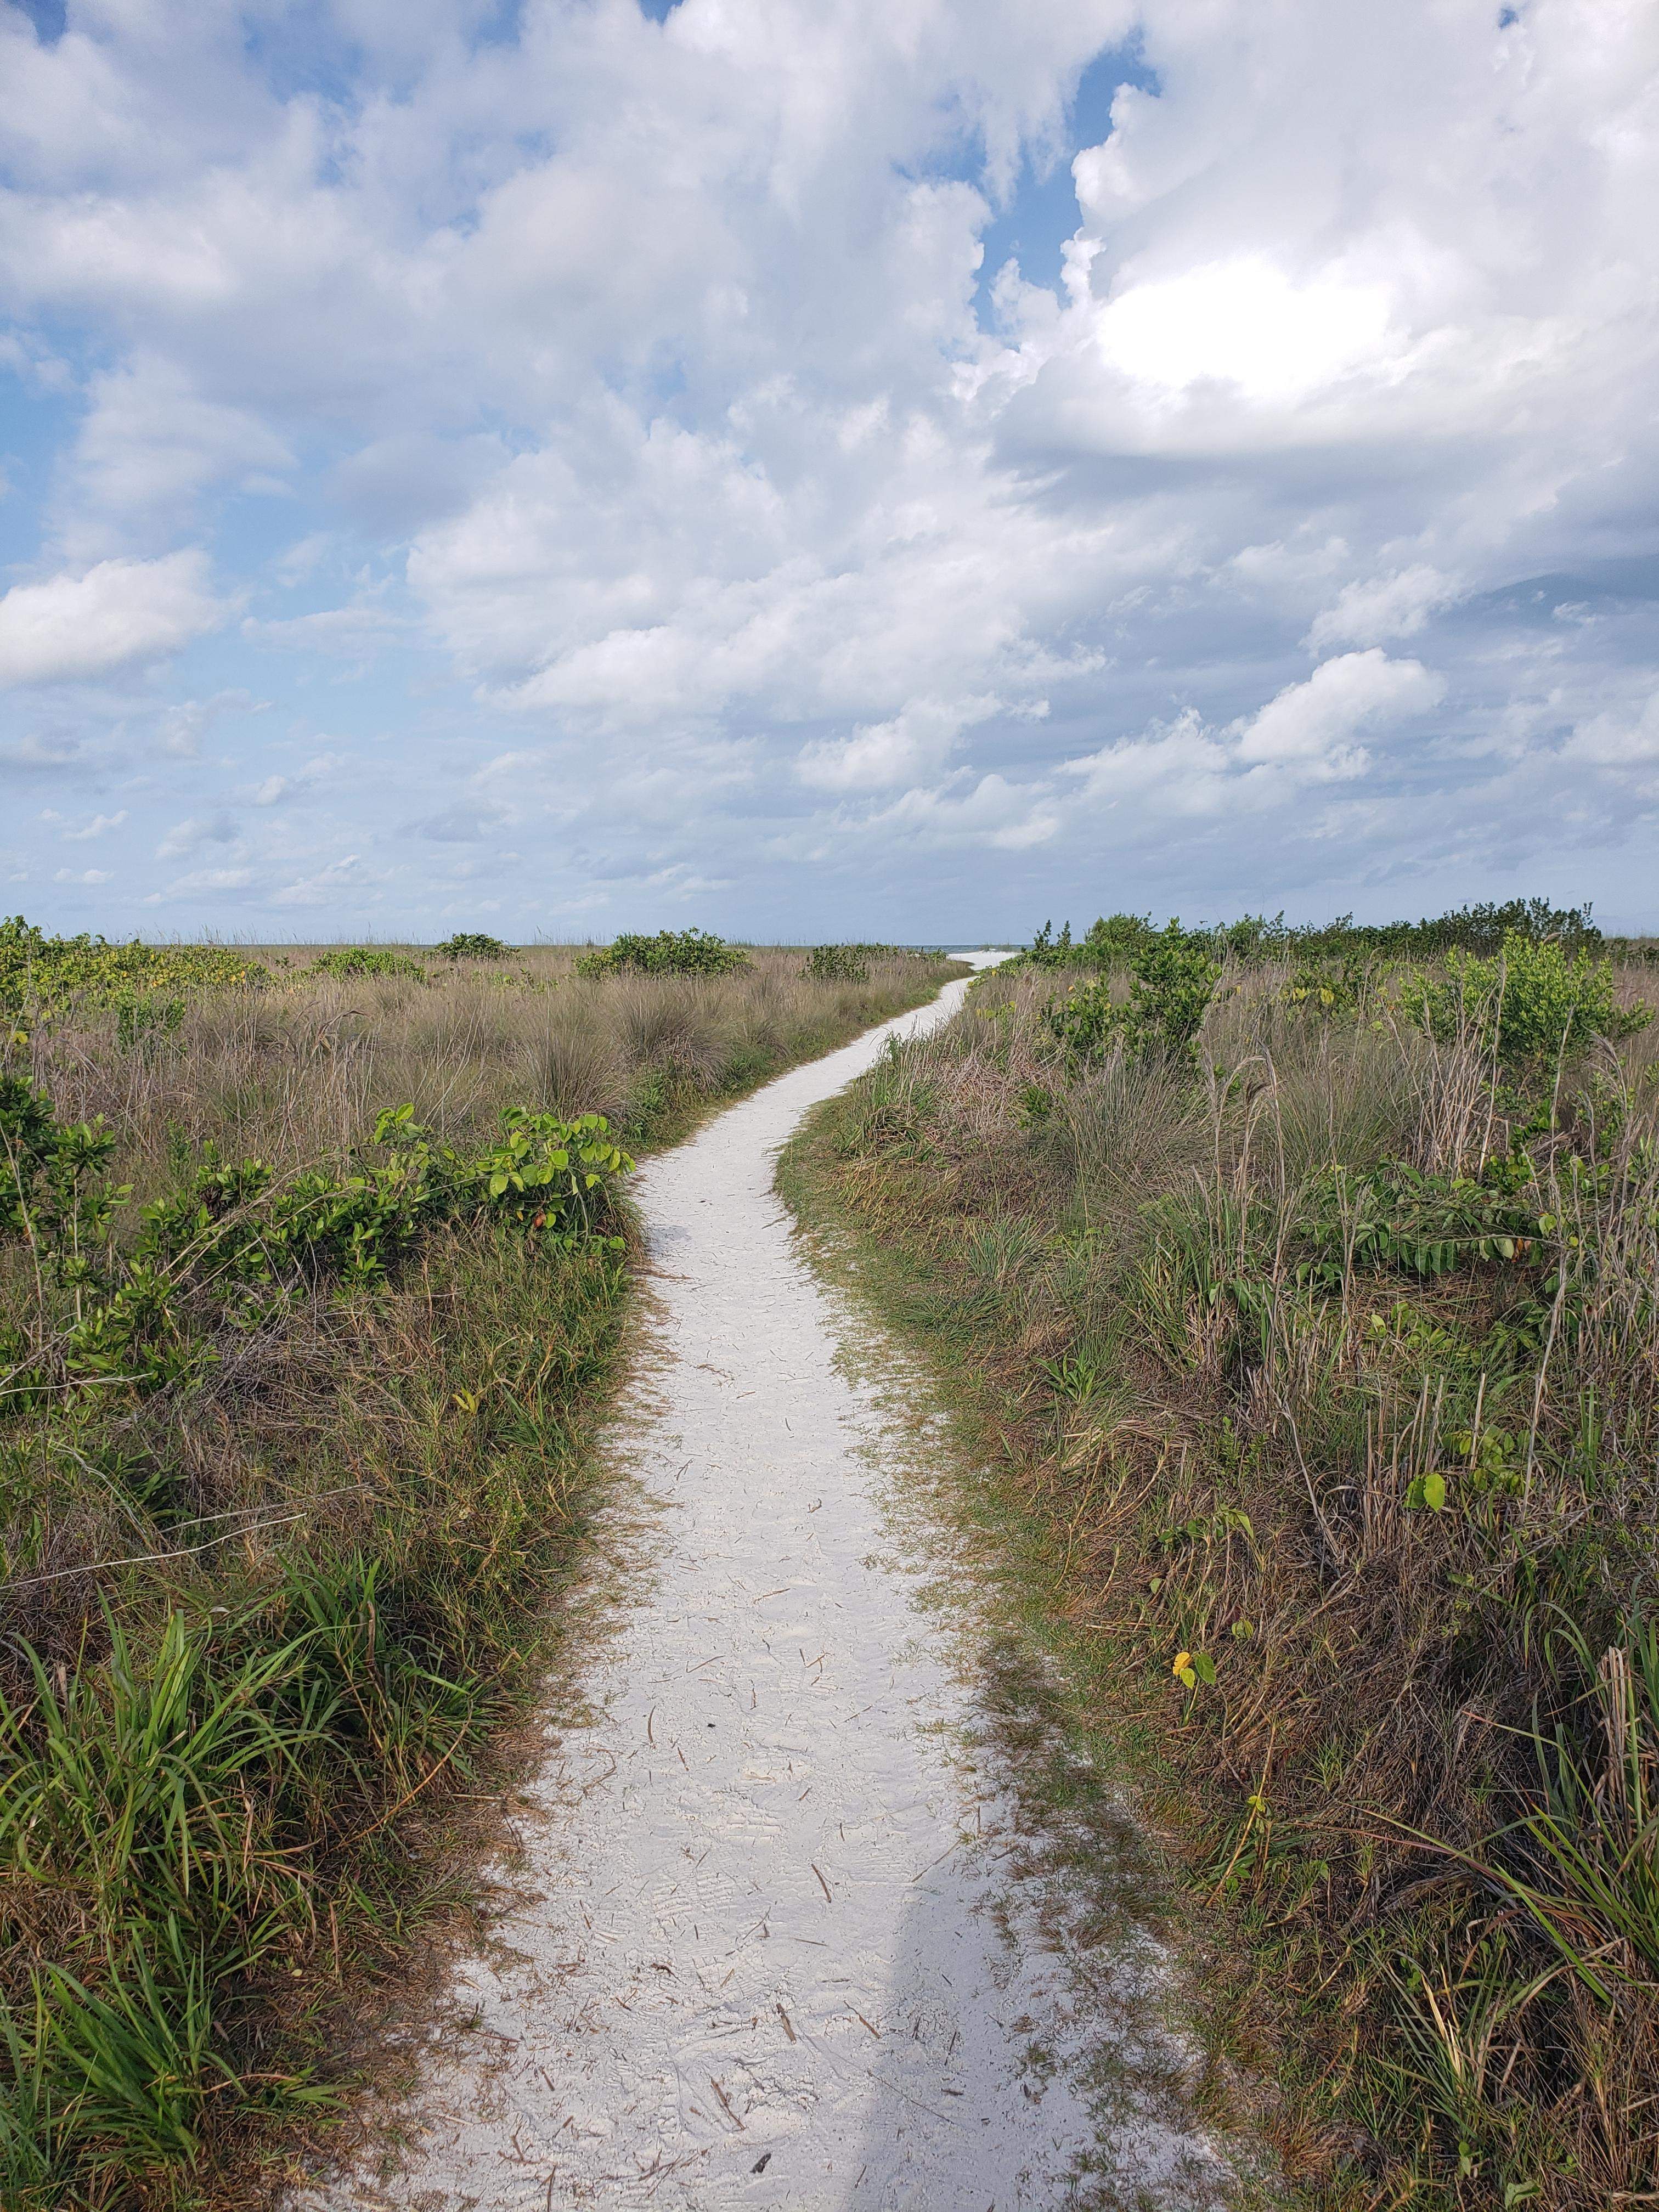 sandy path to the beach with vegetation and blue skies